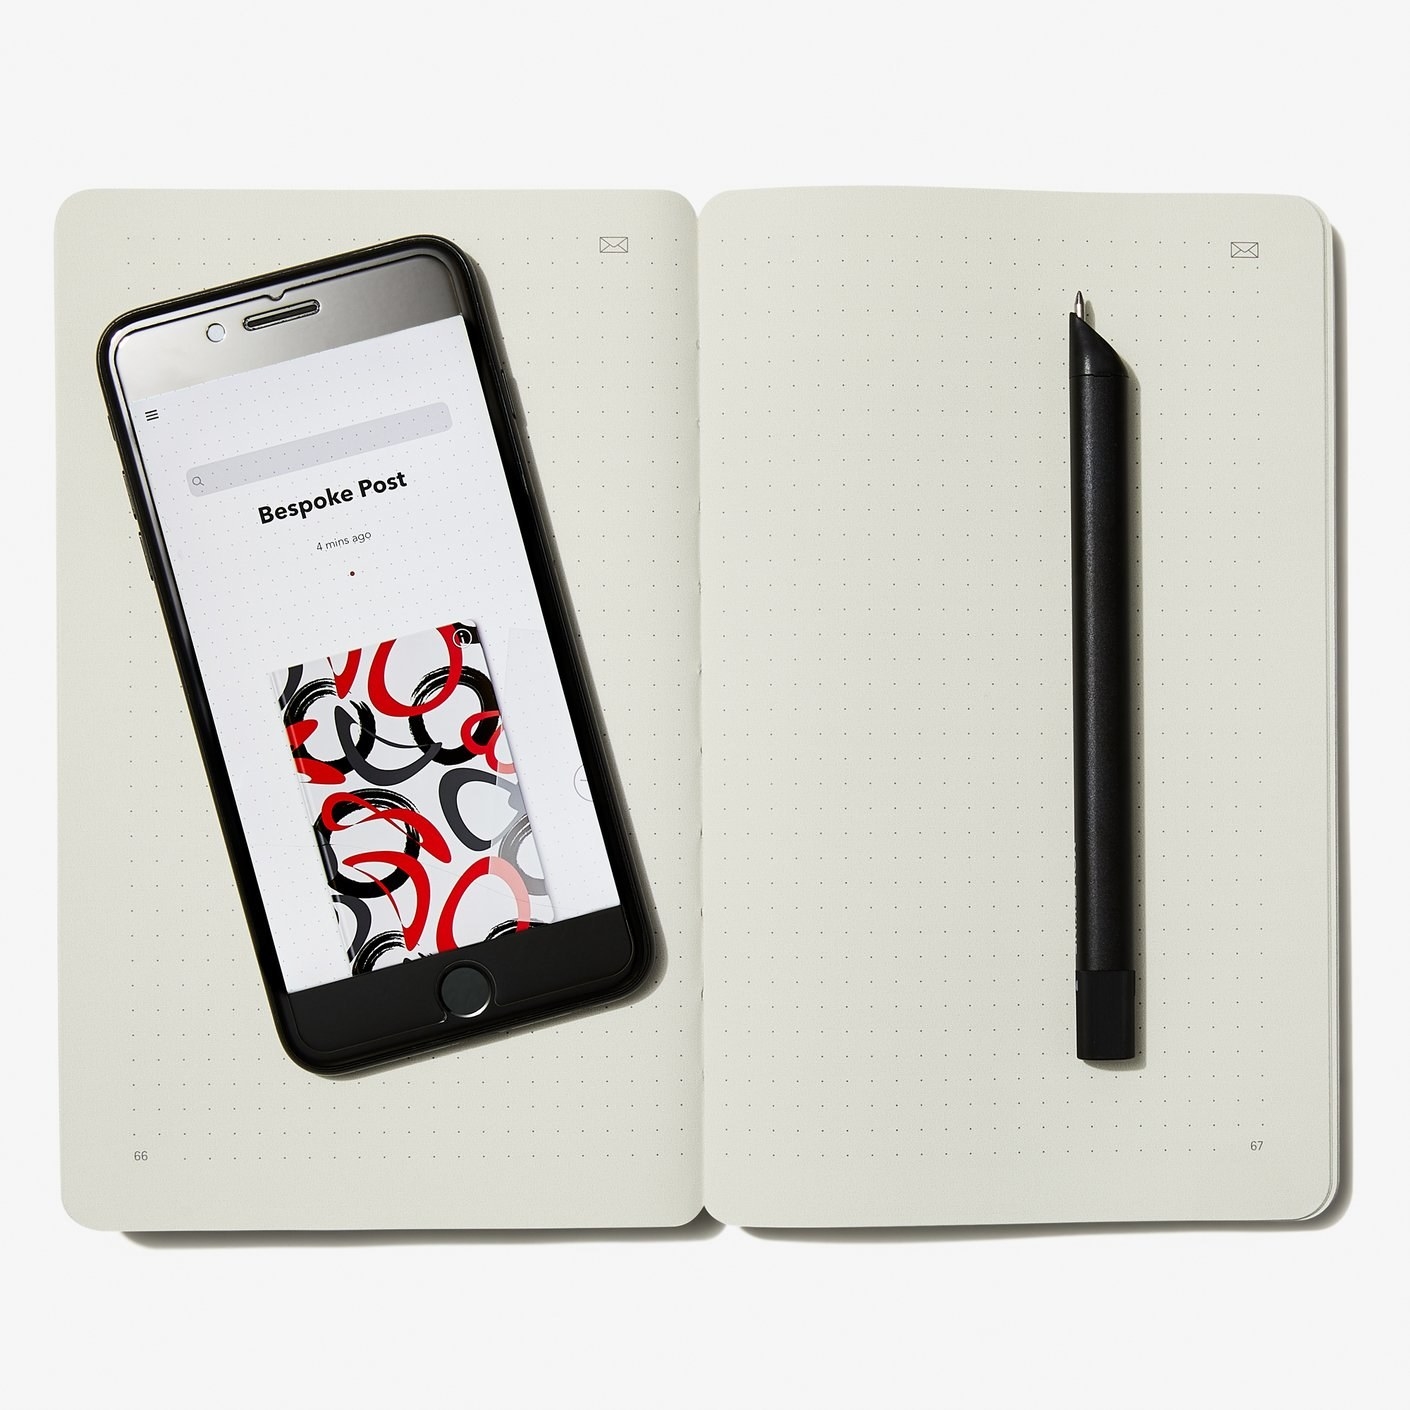 An open notebook with dotted paged, a smartphone with notes pulled up and a Bluetooth-connected pen 